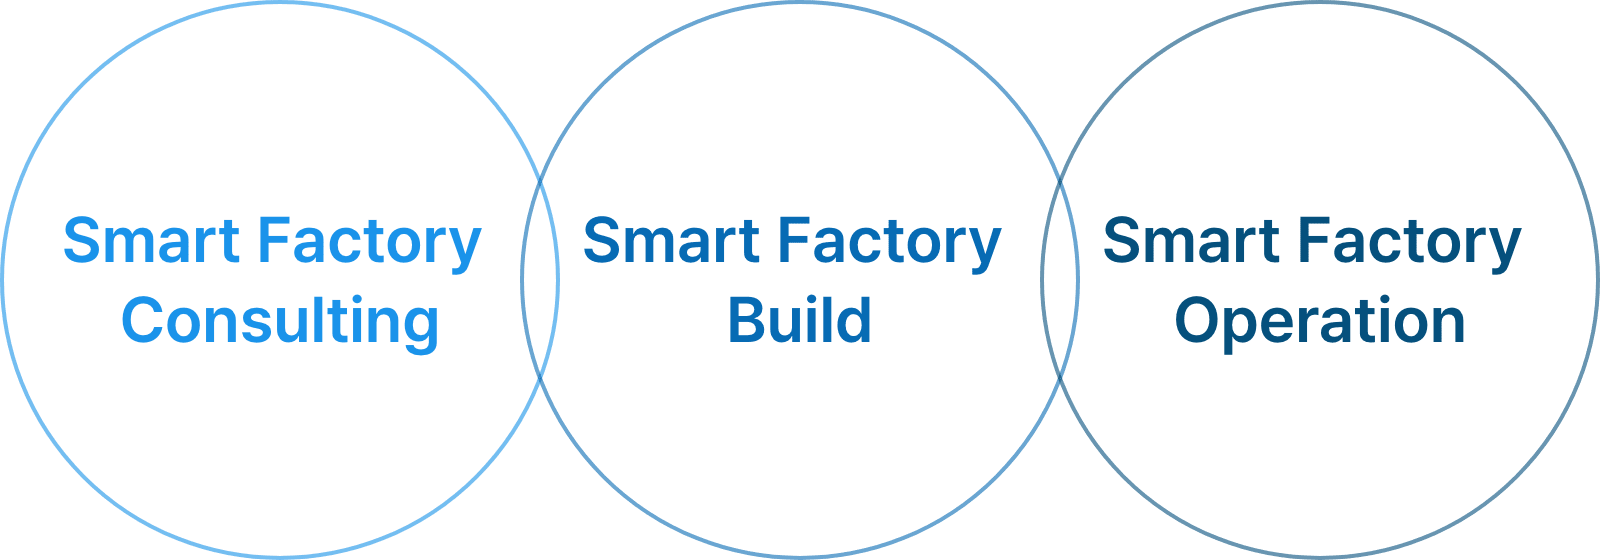 Smart Factory Consulting, Build, Operation